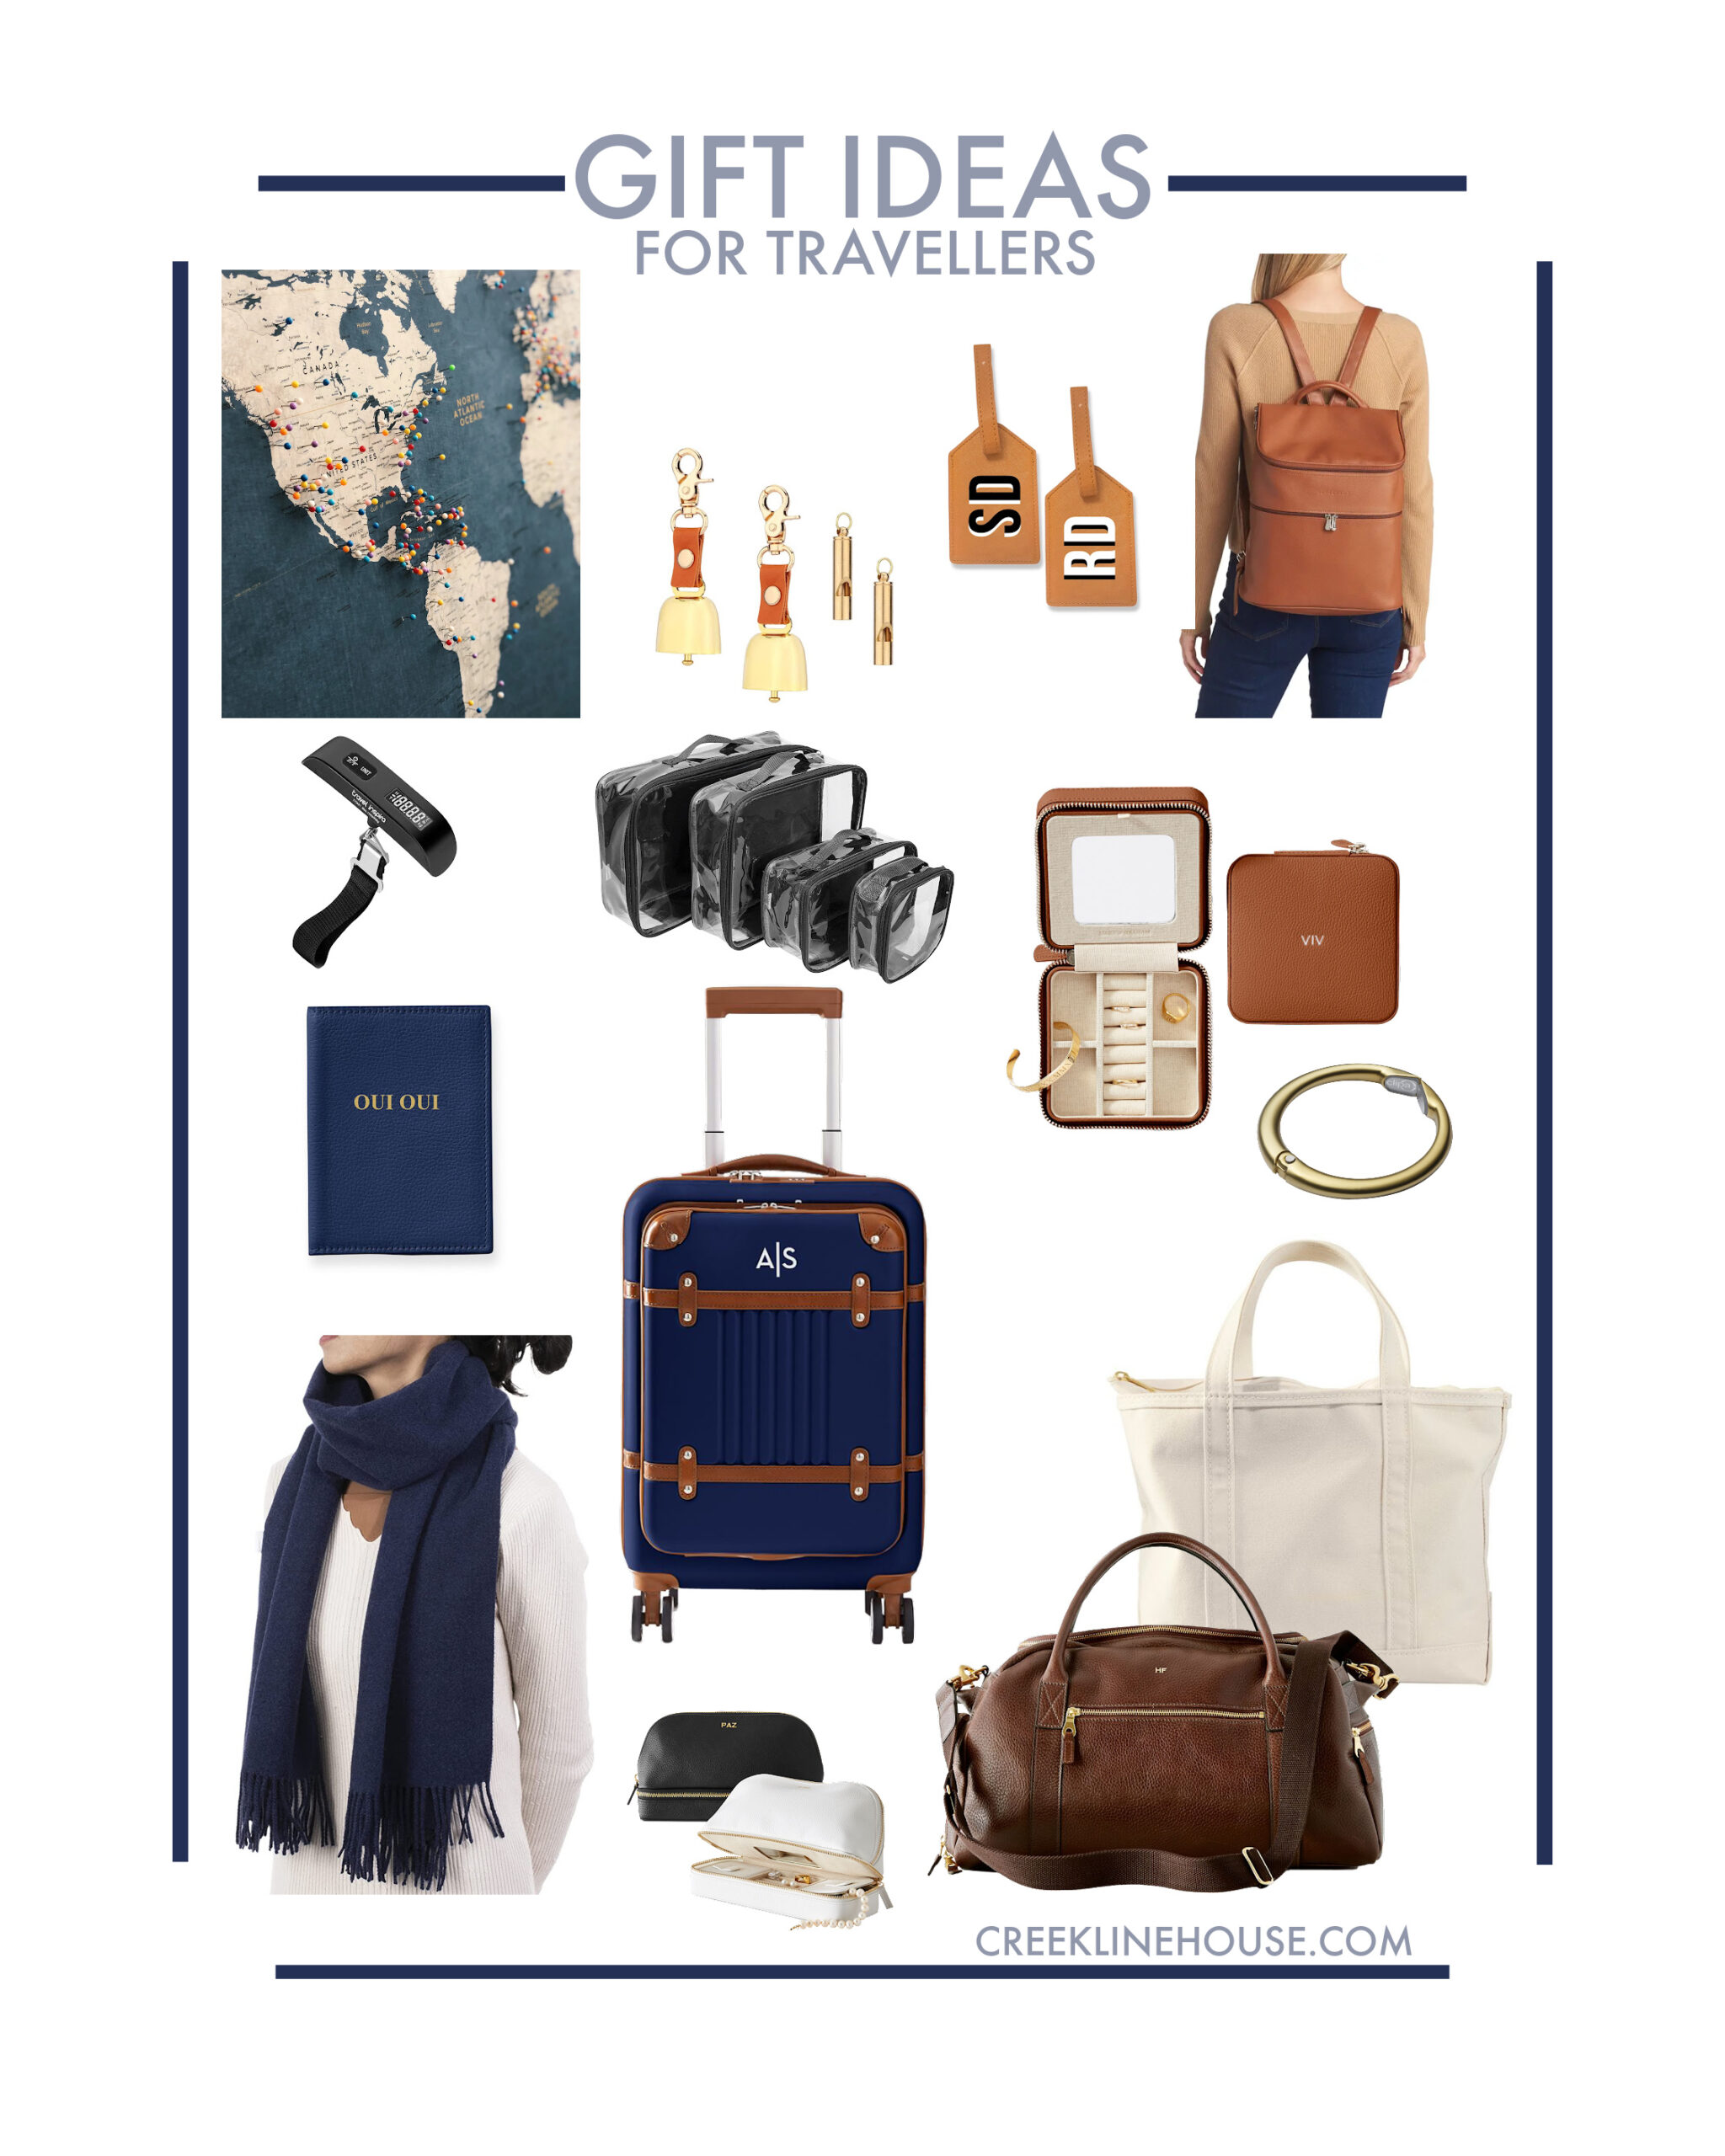 Do you know someone who loves to travel, or even who loves the idea of travelling more? These ideas might be exactly perfect for them. Here are my gift ideas for travellers for this year!